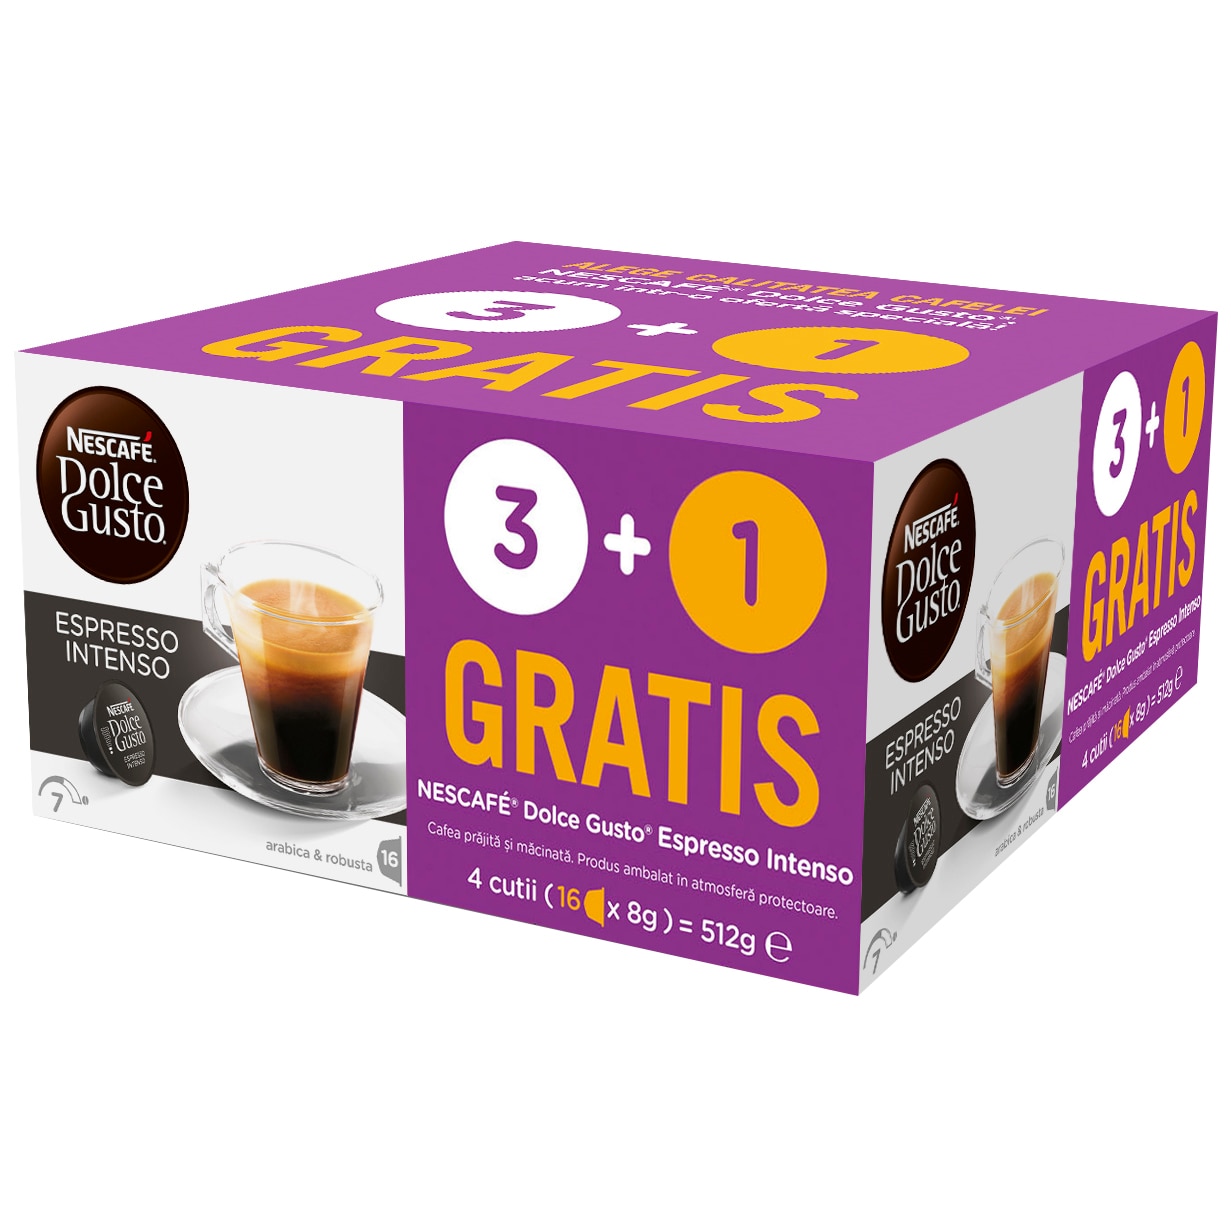 trumpet Bad factor these Pachet Capsule Nescafe Dolce Gusto Espresso Intenso 3+1 Gratuit, 64 caps,  512g - eMAG.ro